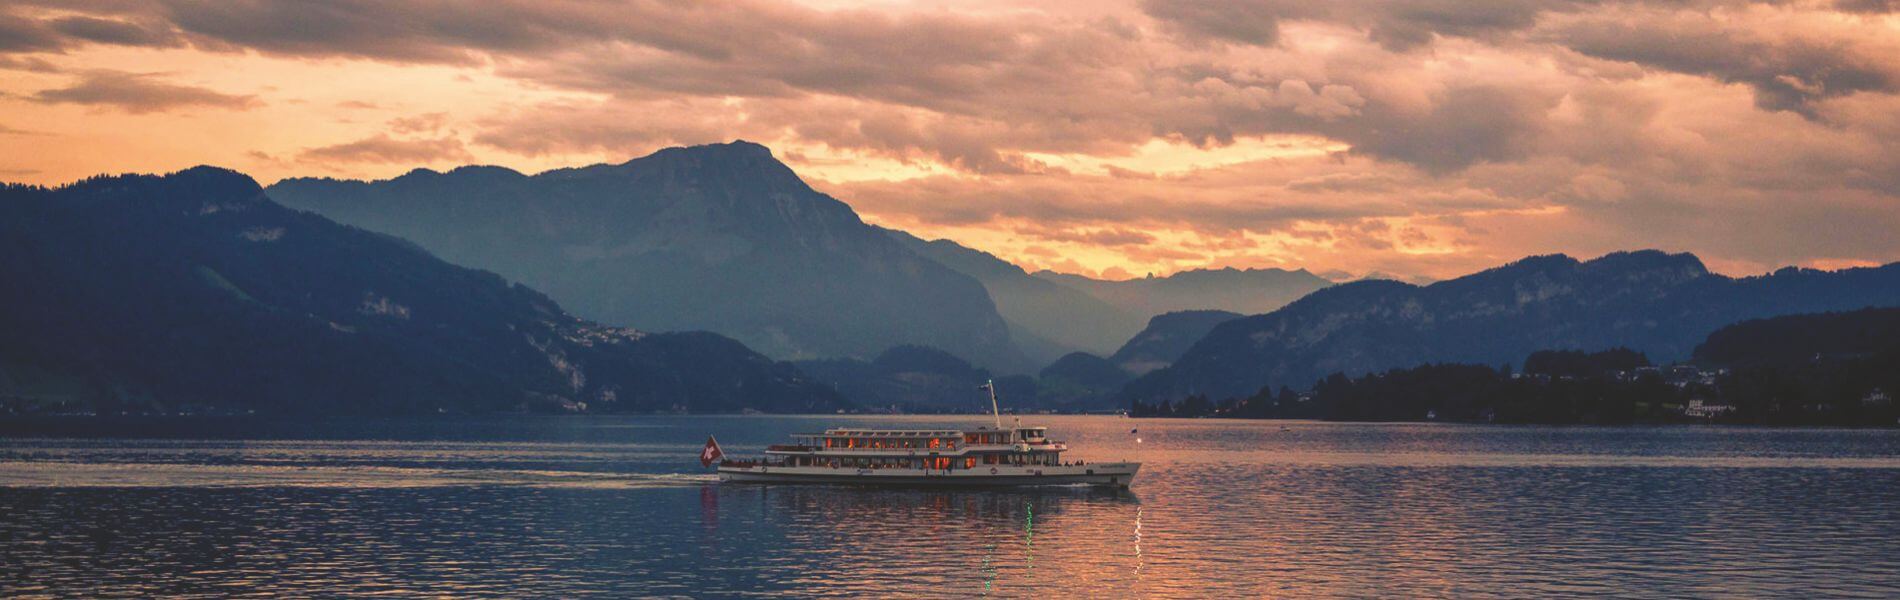 Lake Lucerne Gourmet Cruise - Lunch or Dinner